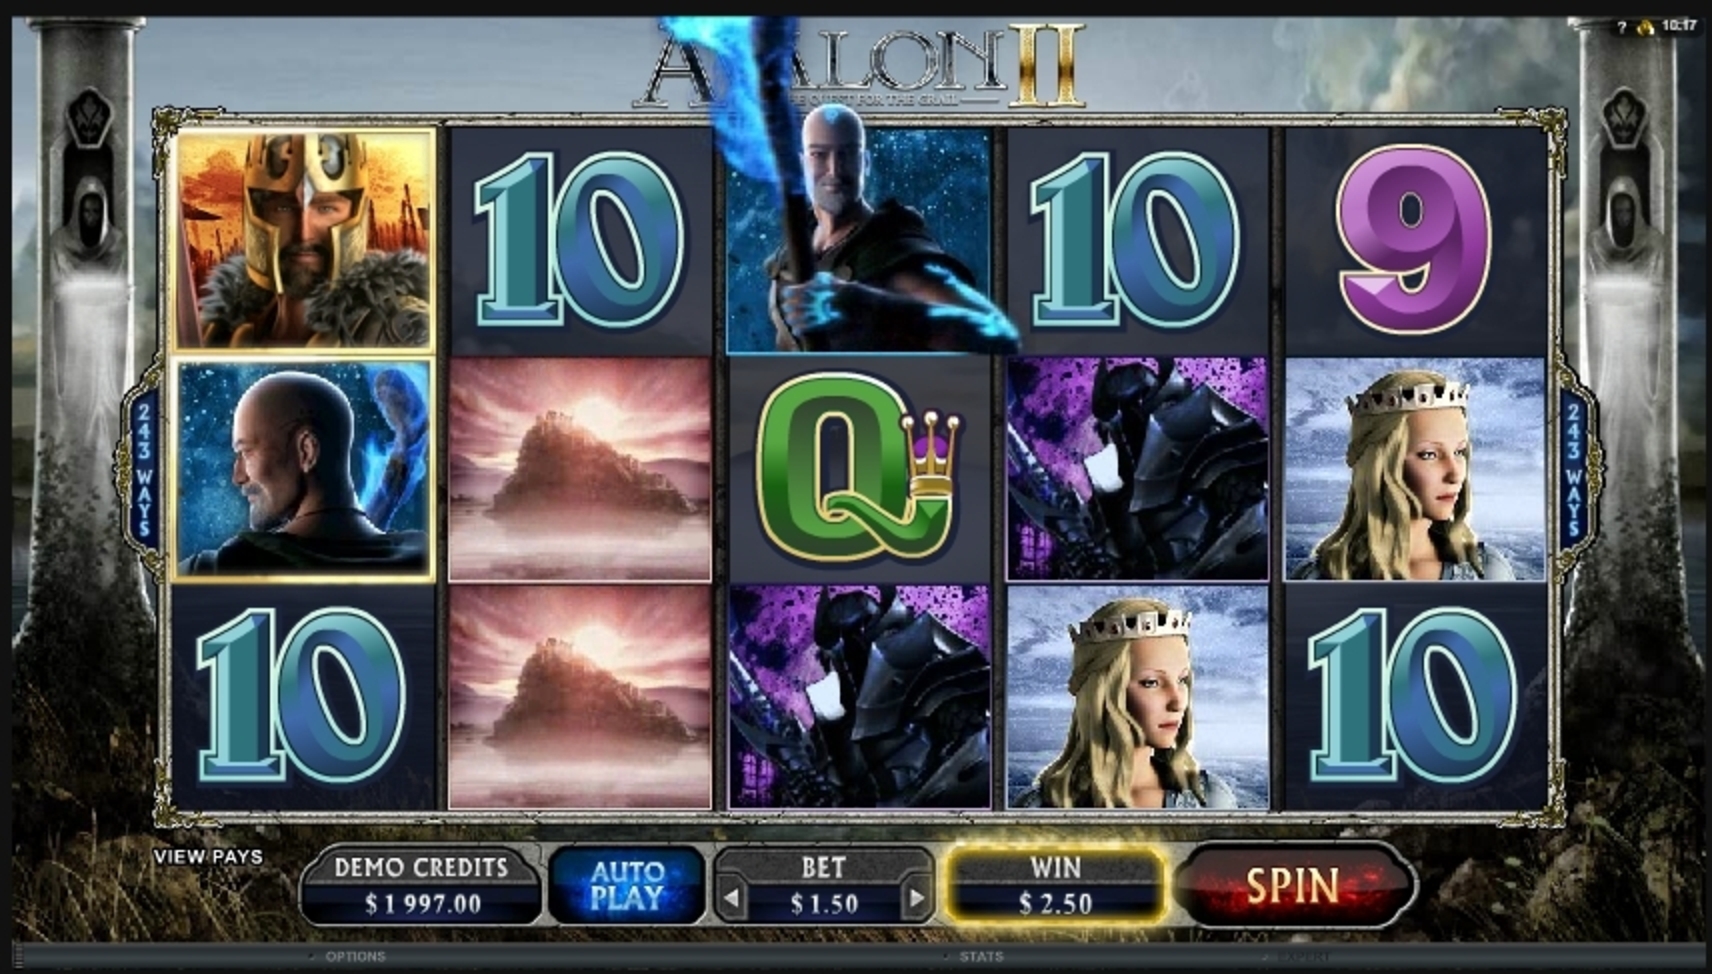 Win Money in Avalon II Free Slot Game by Microgaming